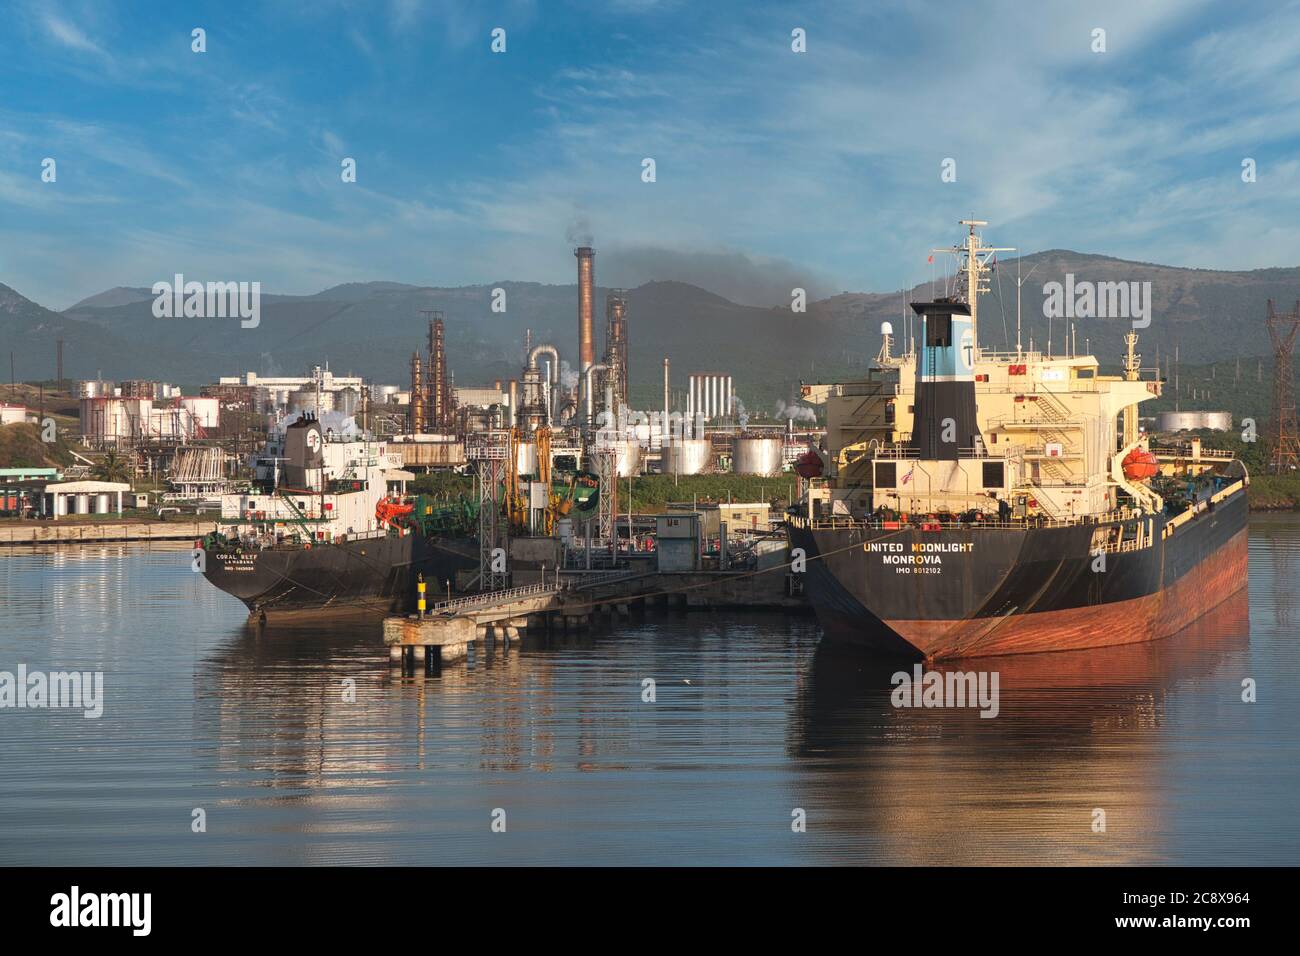 Santiago, Cuba, two oil tankers docked at an oil refinery with oil storage tanks in the background Stock Photo